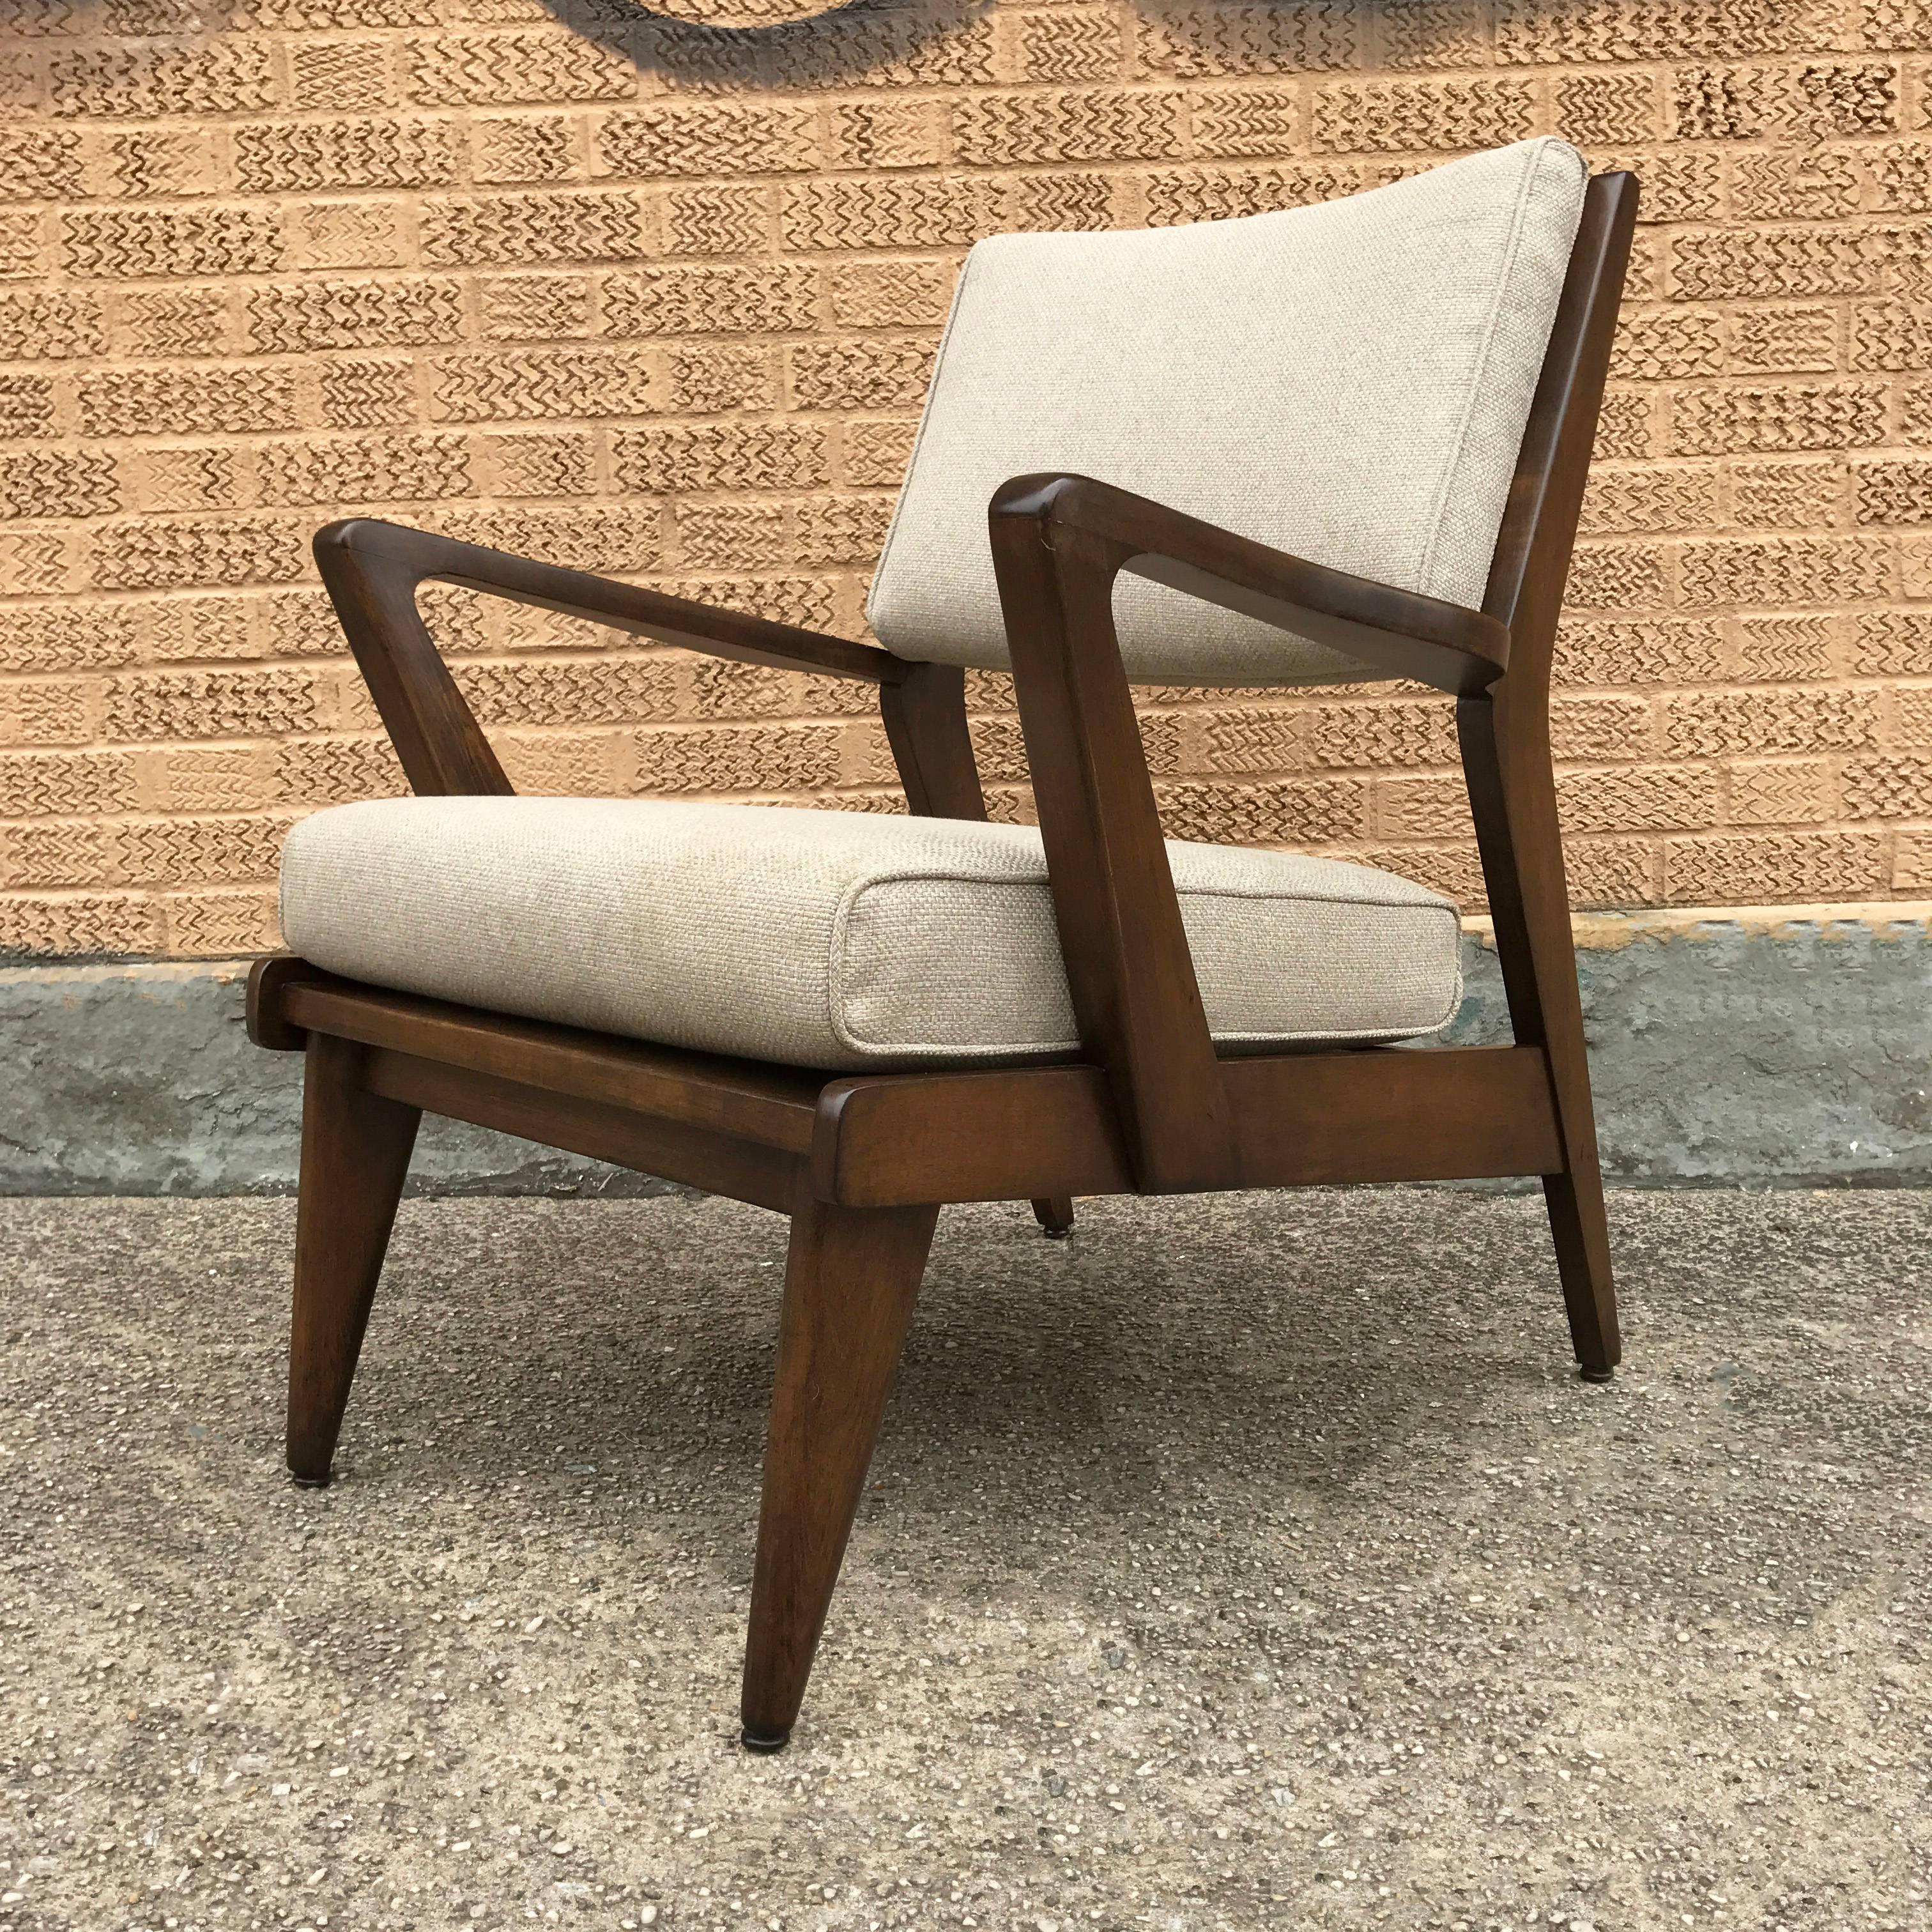 Mid-Century Modern, walnut armchair attributed to Jens Risom is newly upholstered in a cream linen blend.